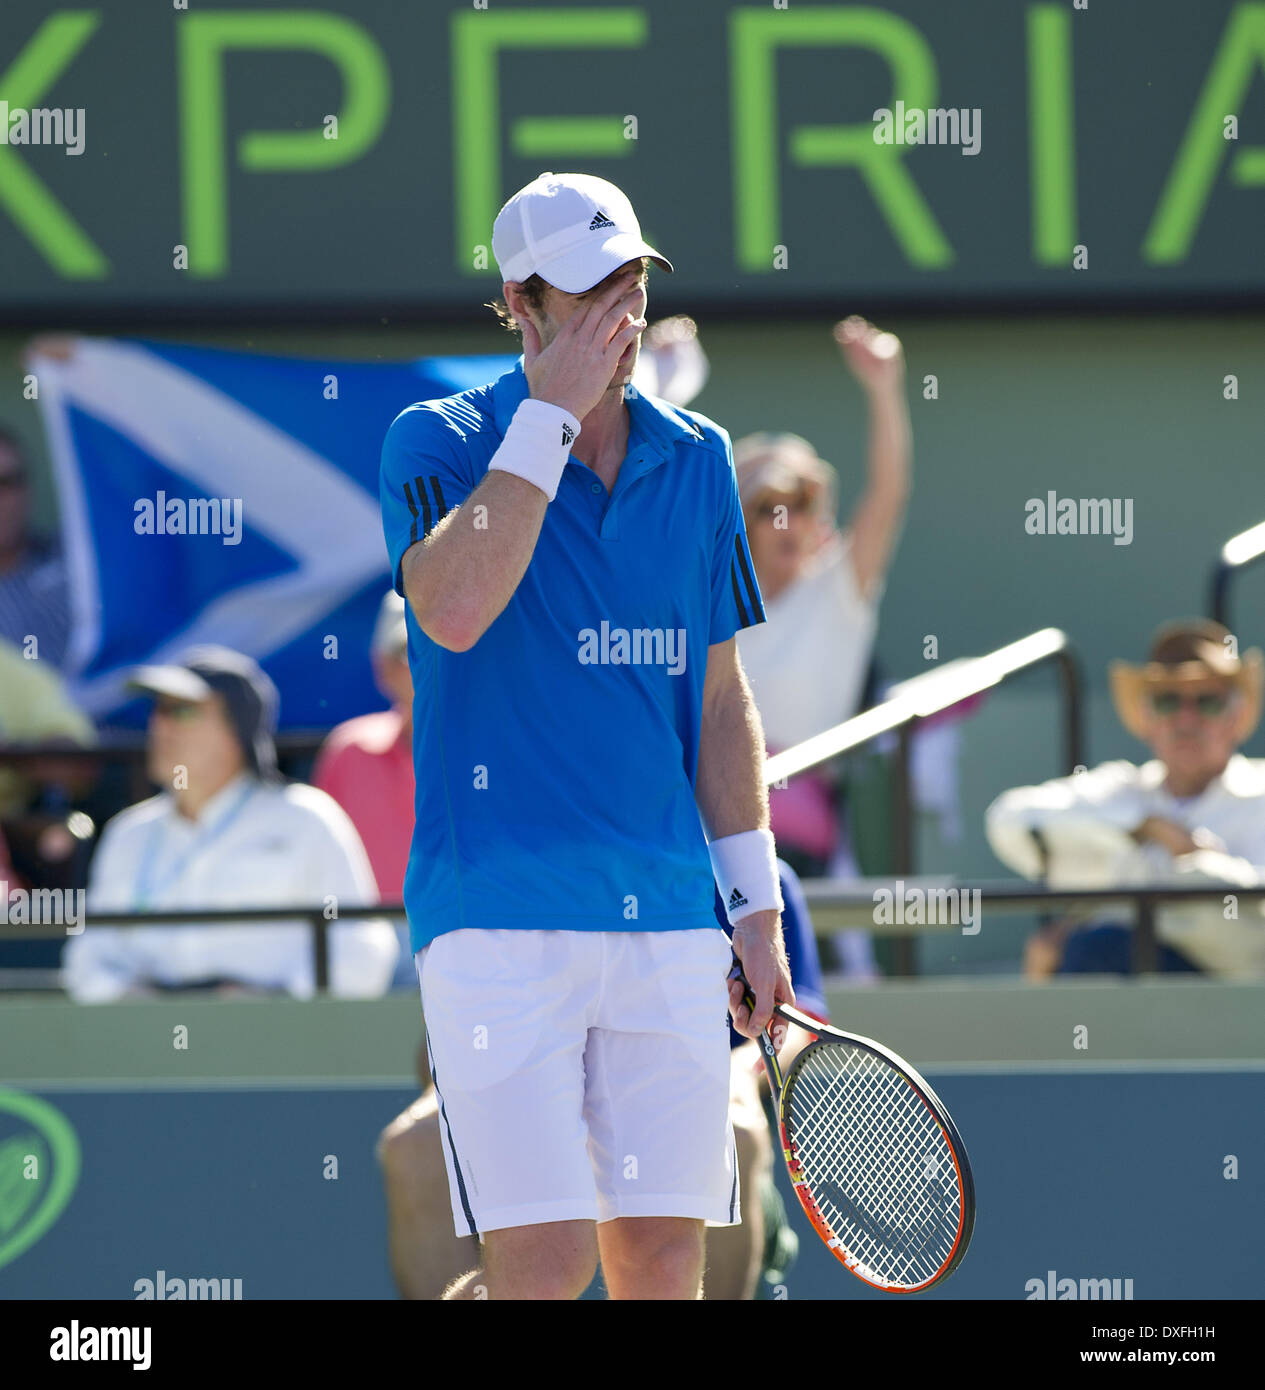 Key Biscayne, Florida, USA. 25th Mar, 2014. Key Biscayne - March 25: Fans wave the Scottish flag as ANDY MURRAY (GBR) defeats Jo-Wilfried Tsonga (FRA) 64, 61 during his Quarter Final match at the 2014 Sony Open Tennis tournament. (Photos by Andrew Patron) Credit:  Andrew Patron/ZUMAPRESS.com/Alamy Live News Stock Photo